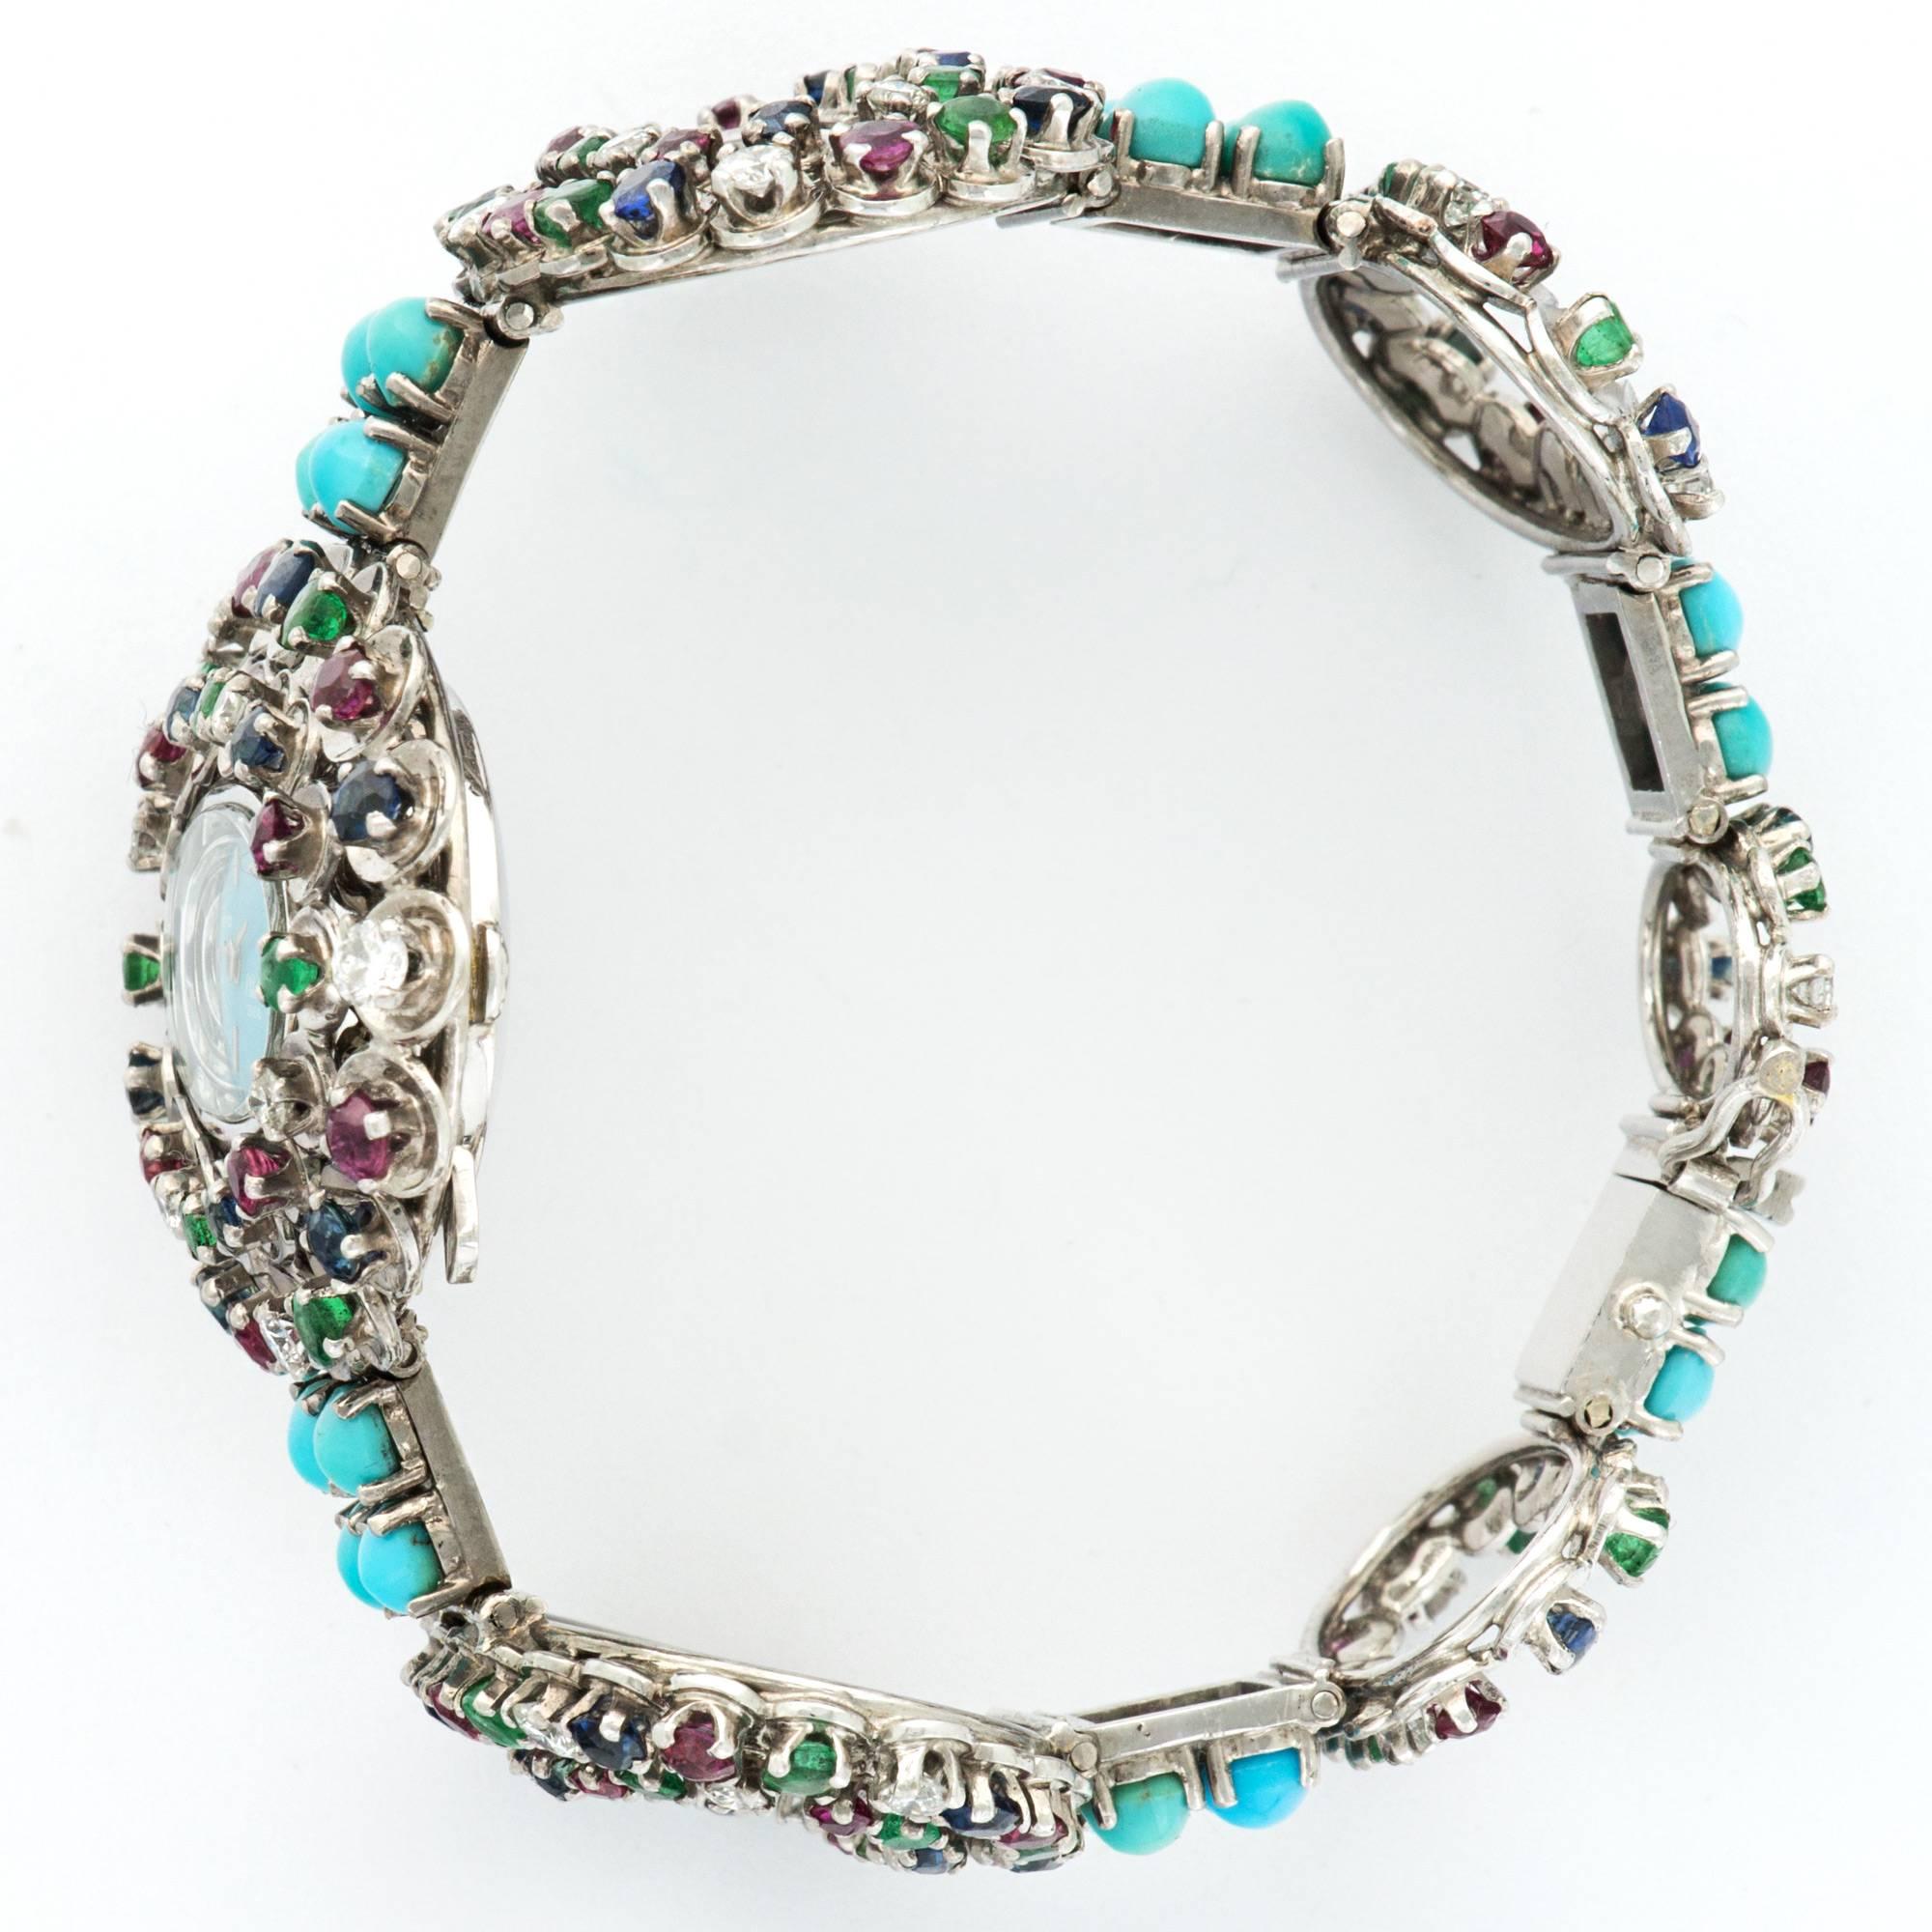 A Truly Unique 18k White Gold Wide-Link Bracelet Watch with Diamonds, Rubies, Sapphires, Emeralds and Turquoise. 

Manual Wind Movement

Circa 1970's